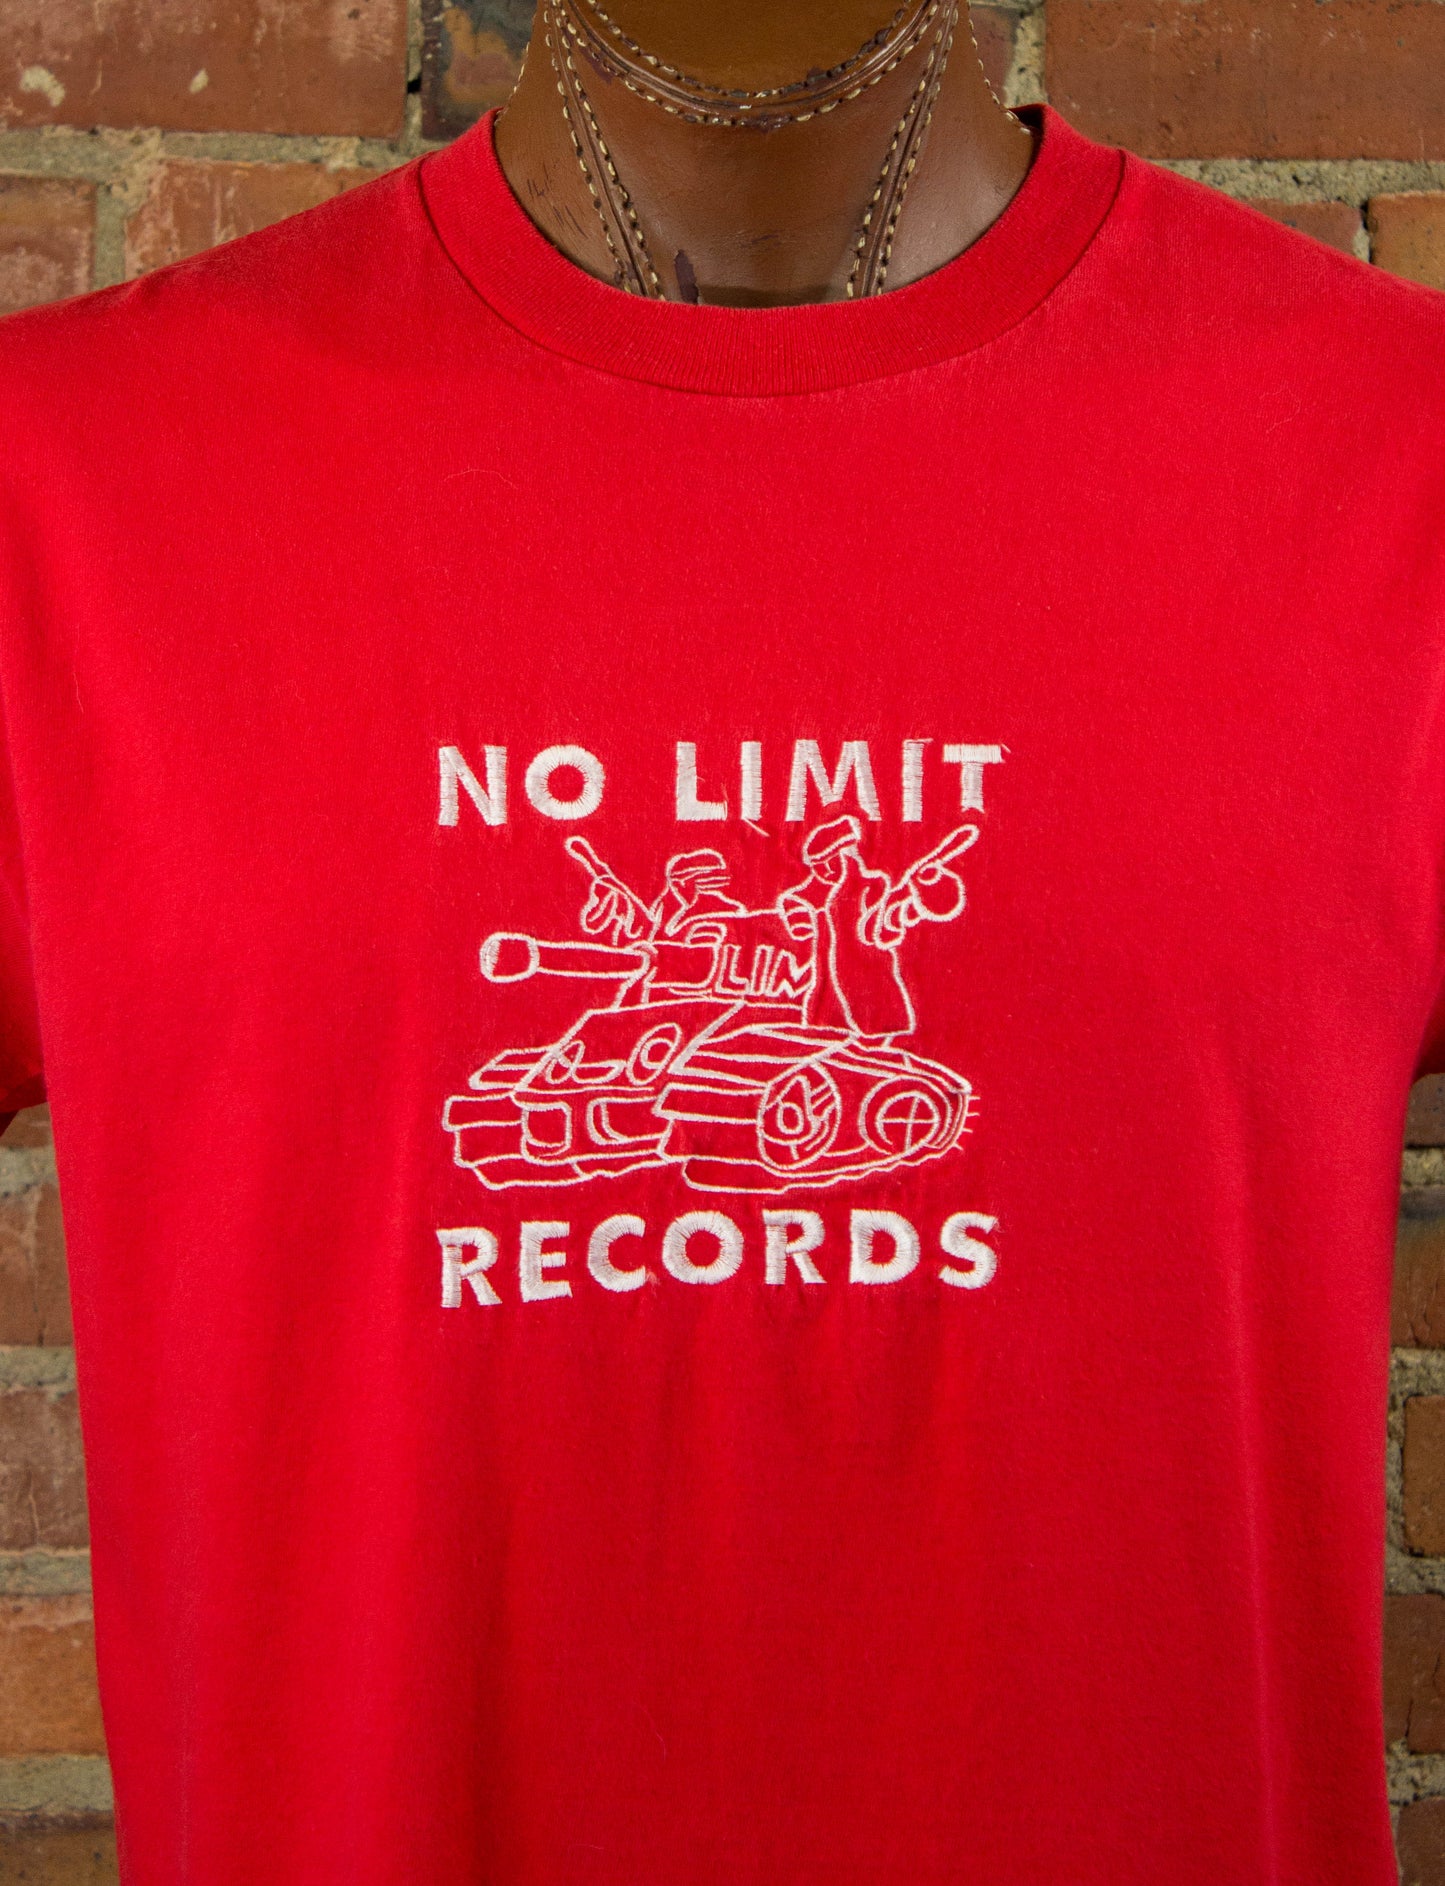 No Limit Records 90s Soldier Gear Embroidered Logo Red Rap Tee Concert T Shirt Unisex Large